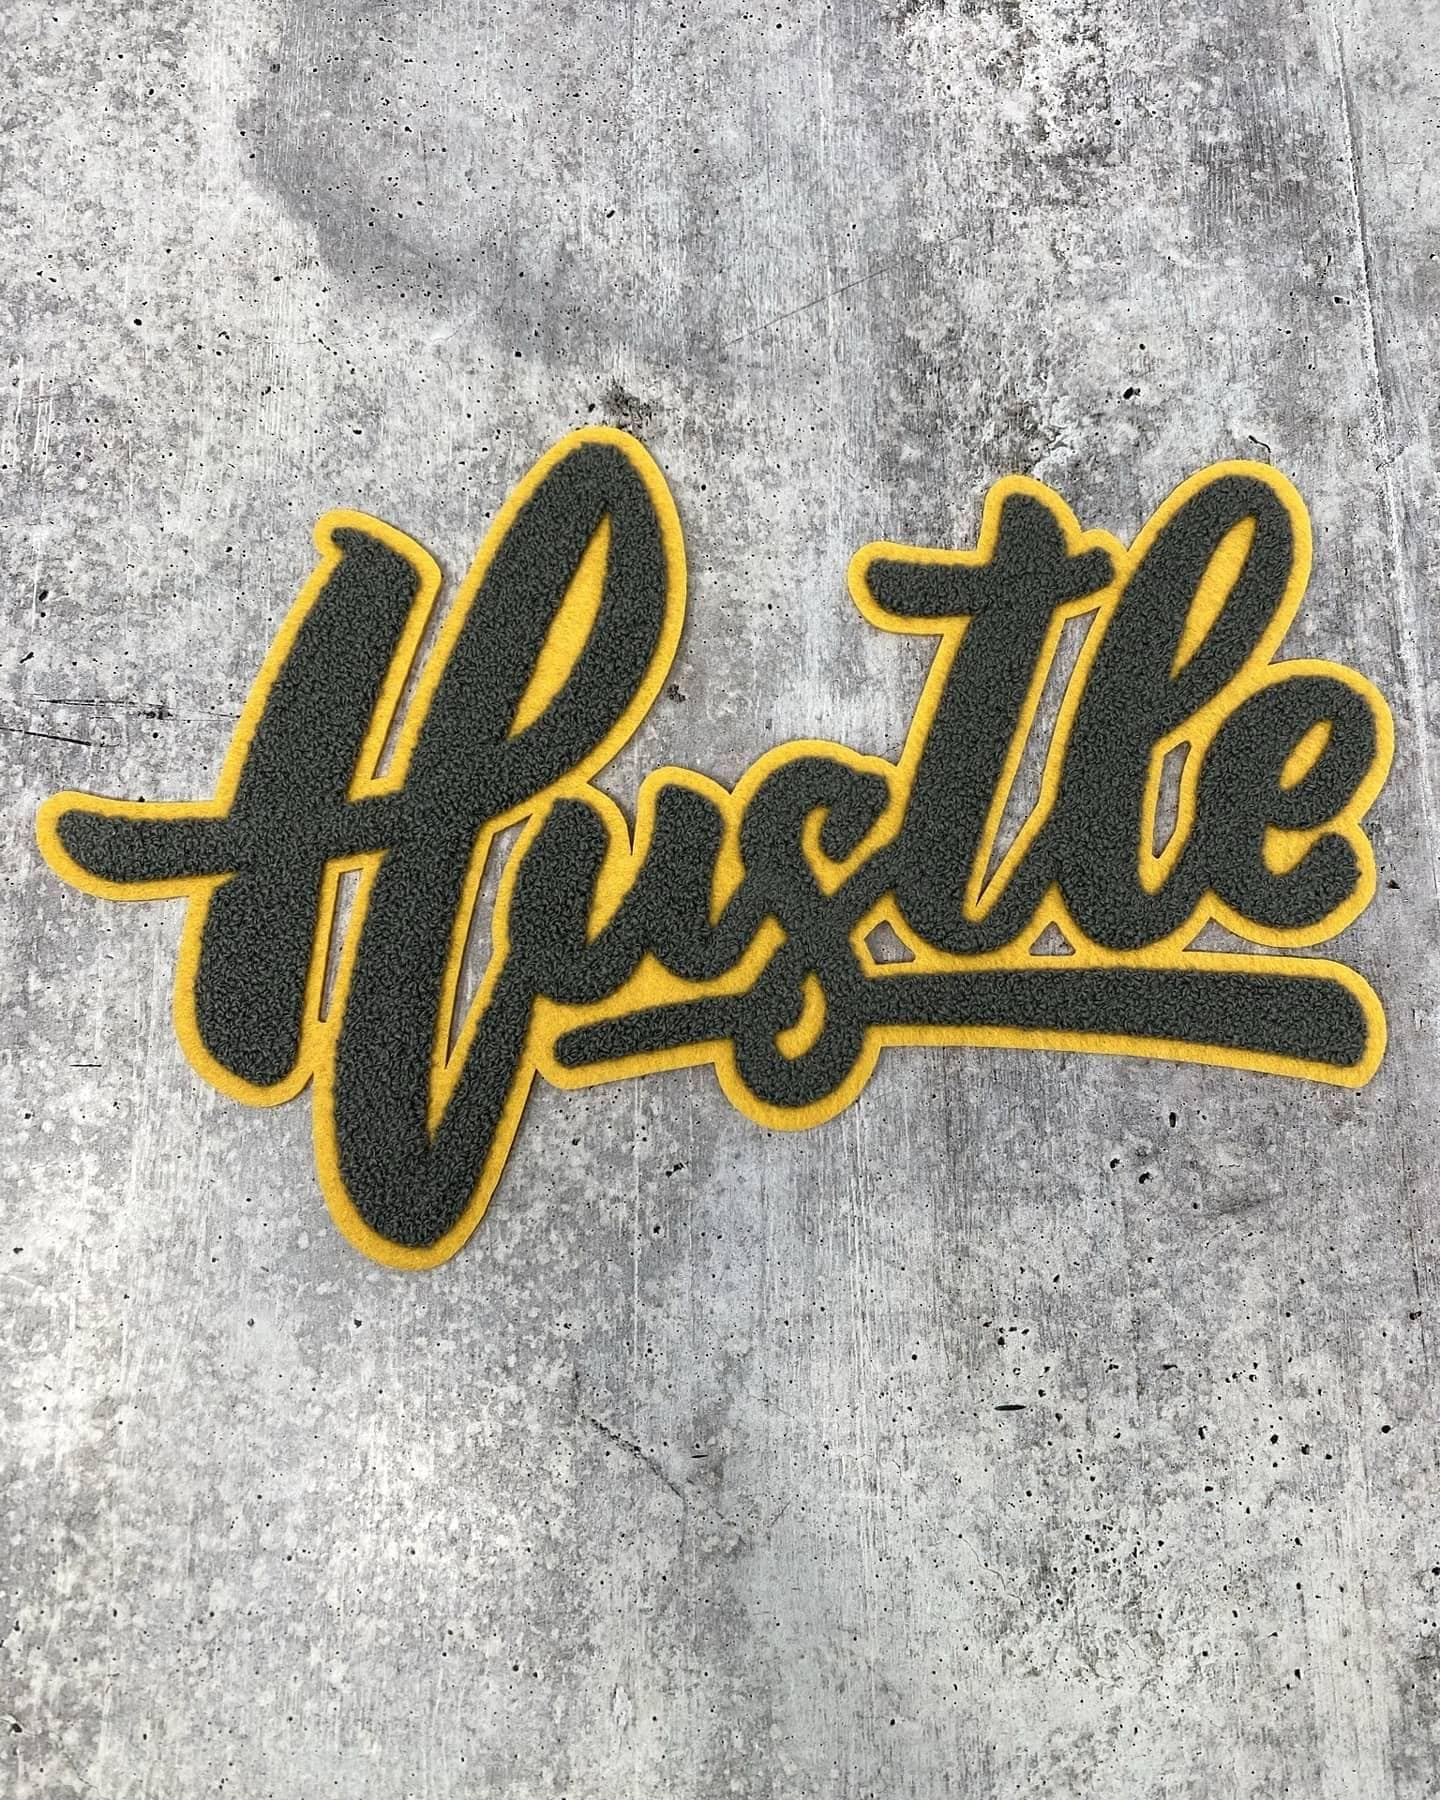 Exclusive, Gray & Gold "Hustle" Chenille Patch (iron-on) Size 10"x8", Varsity Patch for Denim Jacket, Shirts and Hoodies, Large Patch